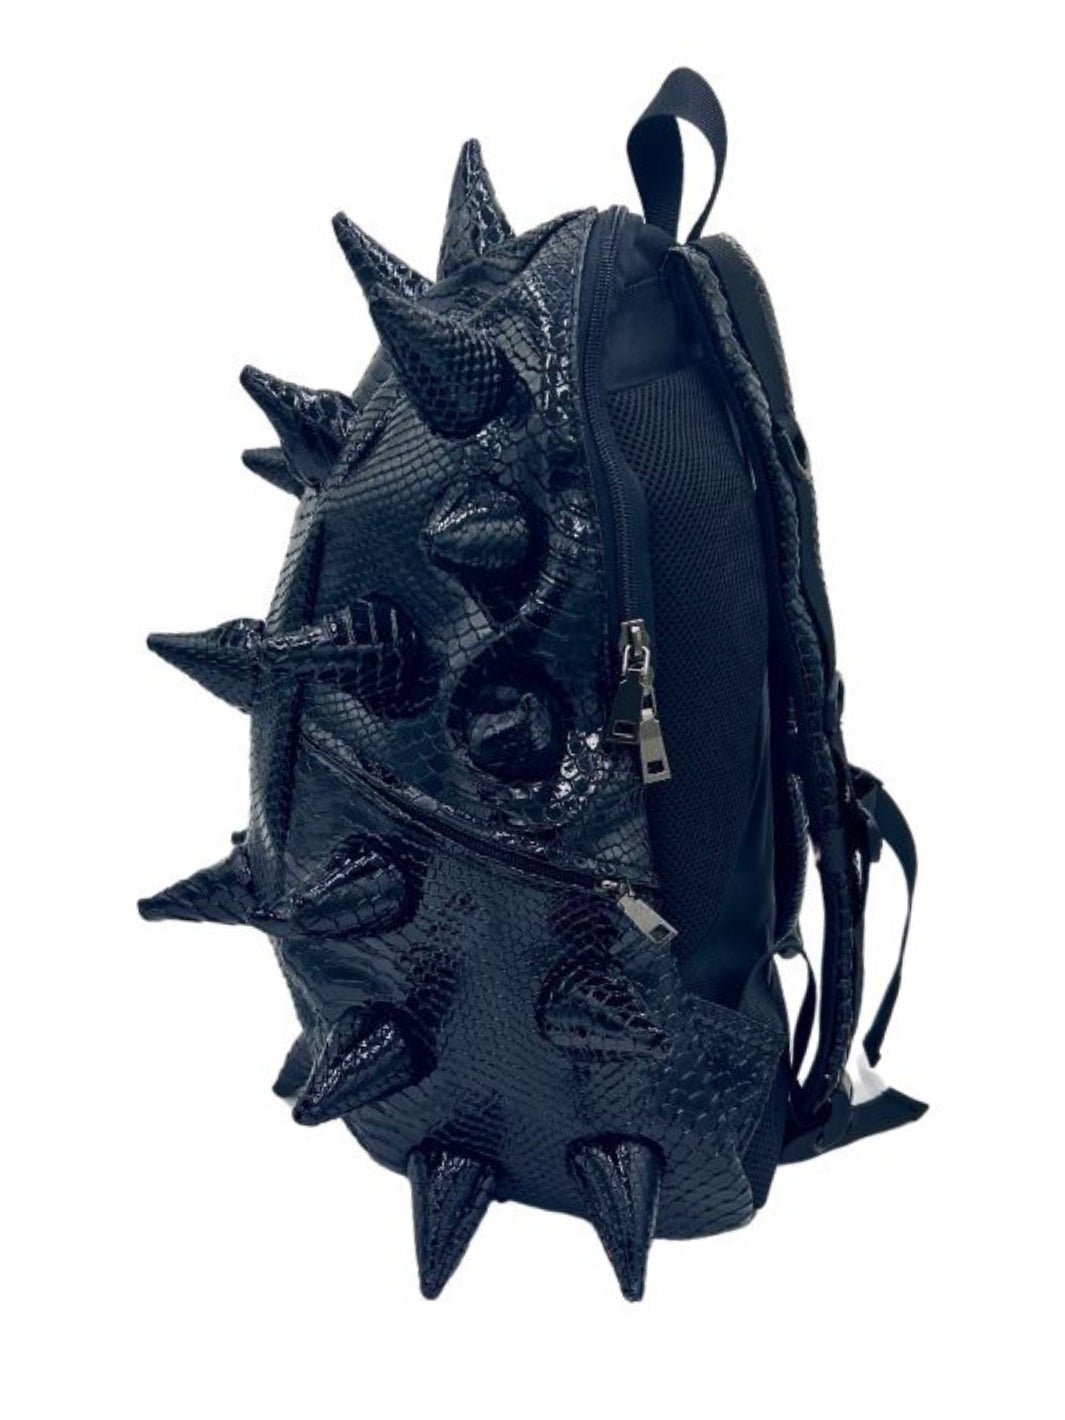 Black Out Black Backpack - Madpax